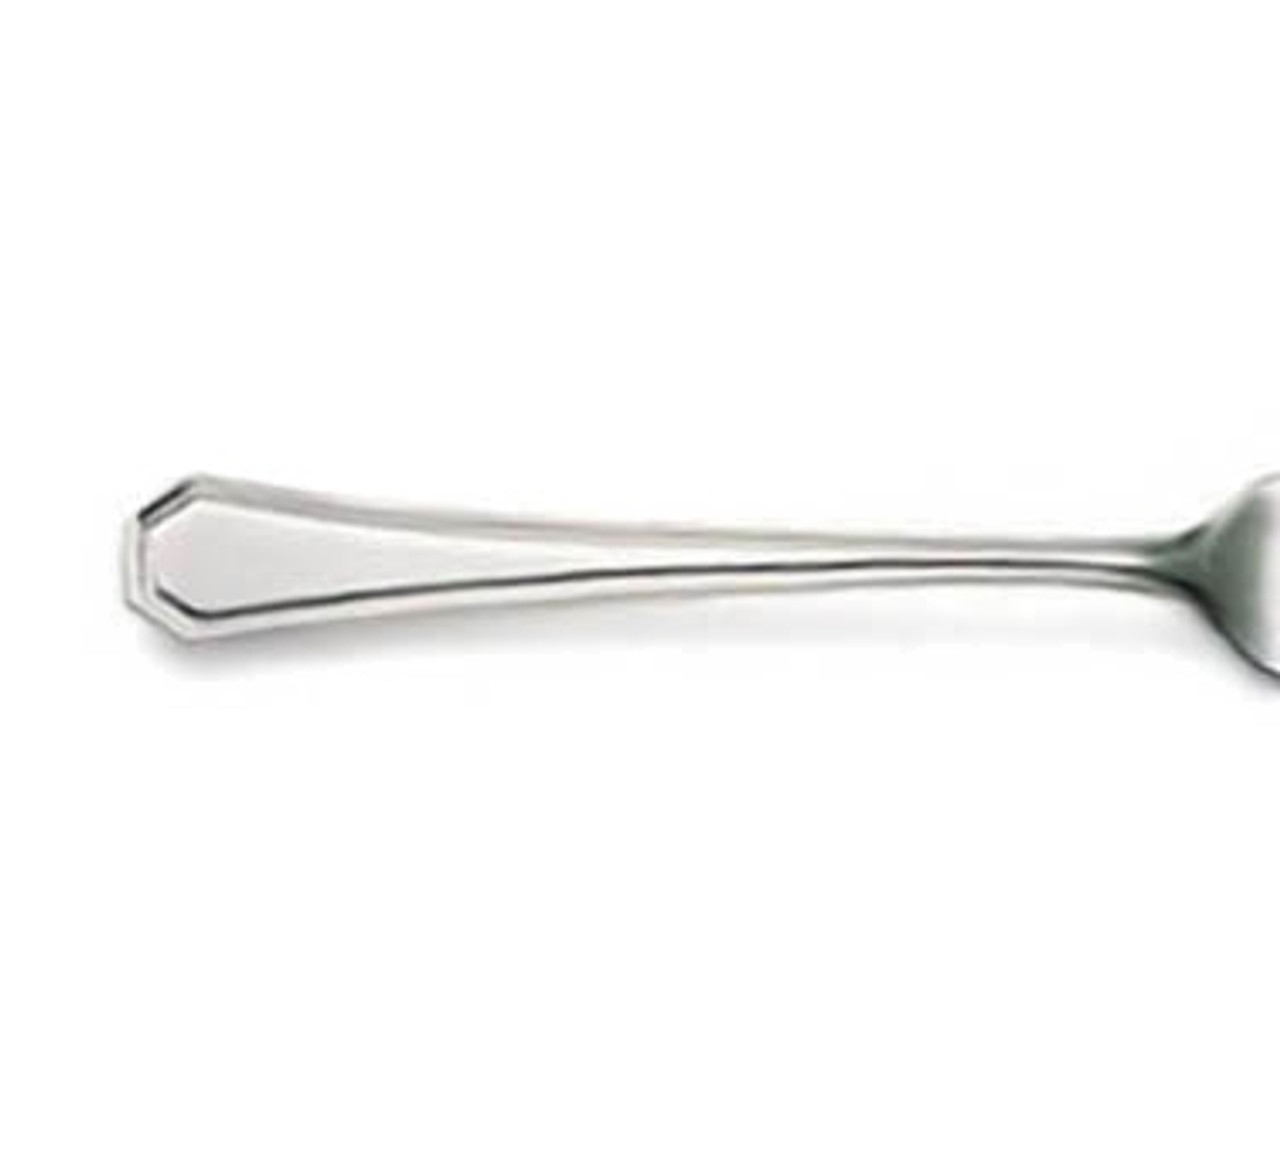 Walco 9711 Prim Butter Knife - Solid Handle